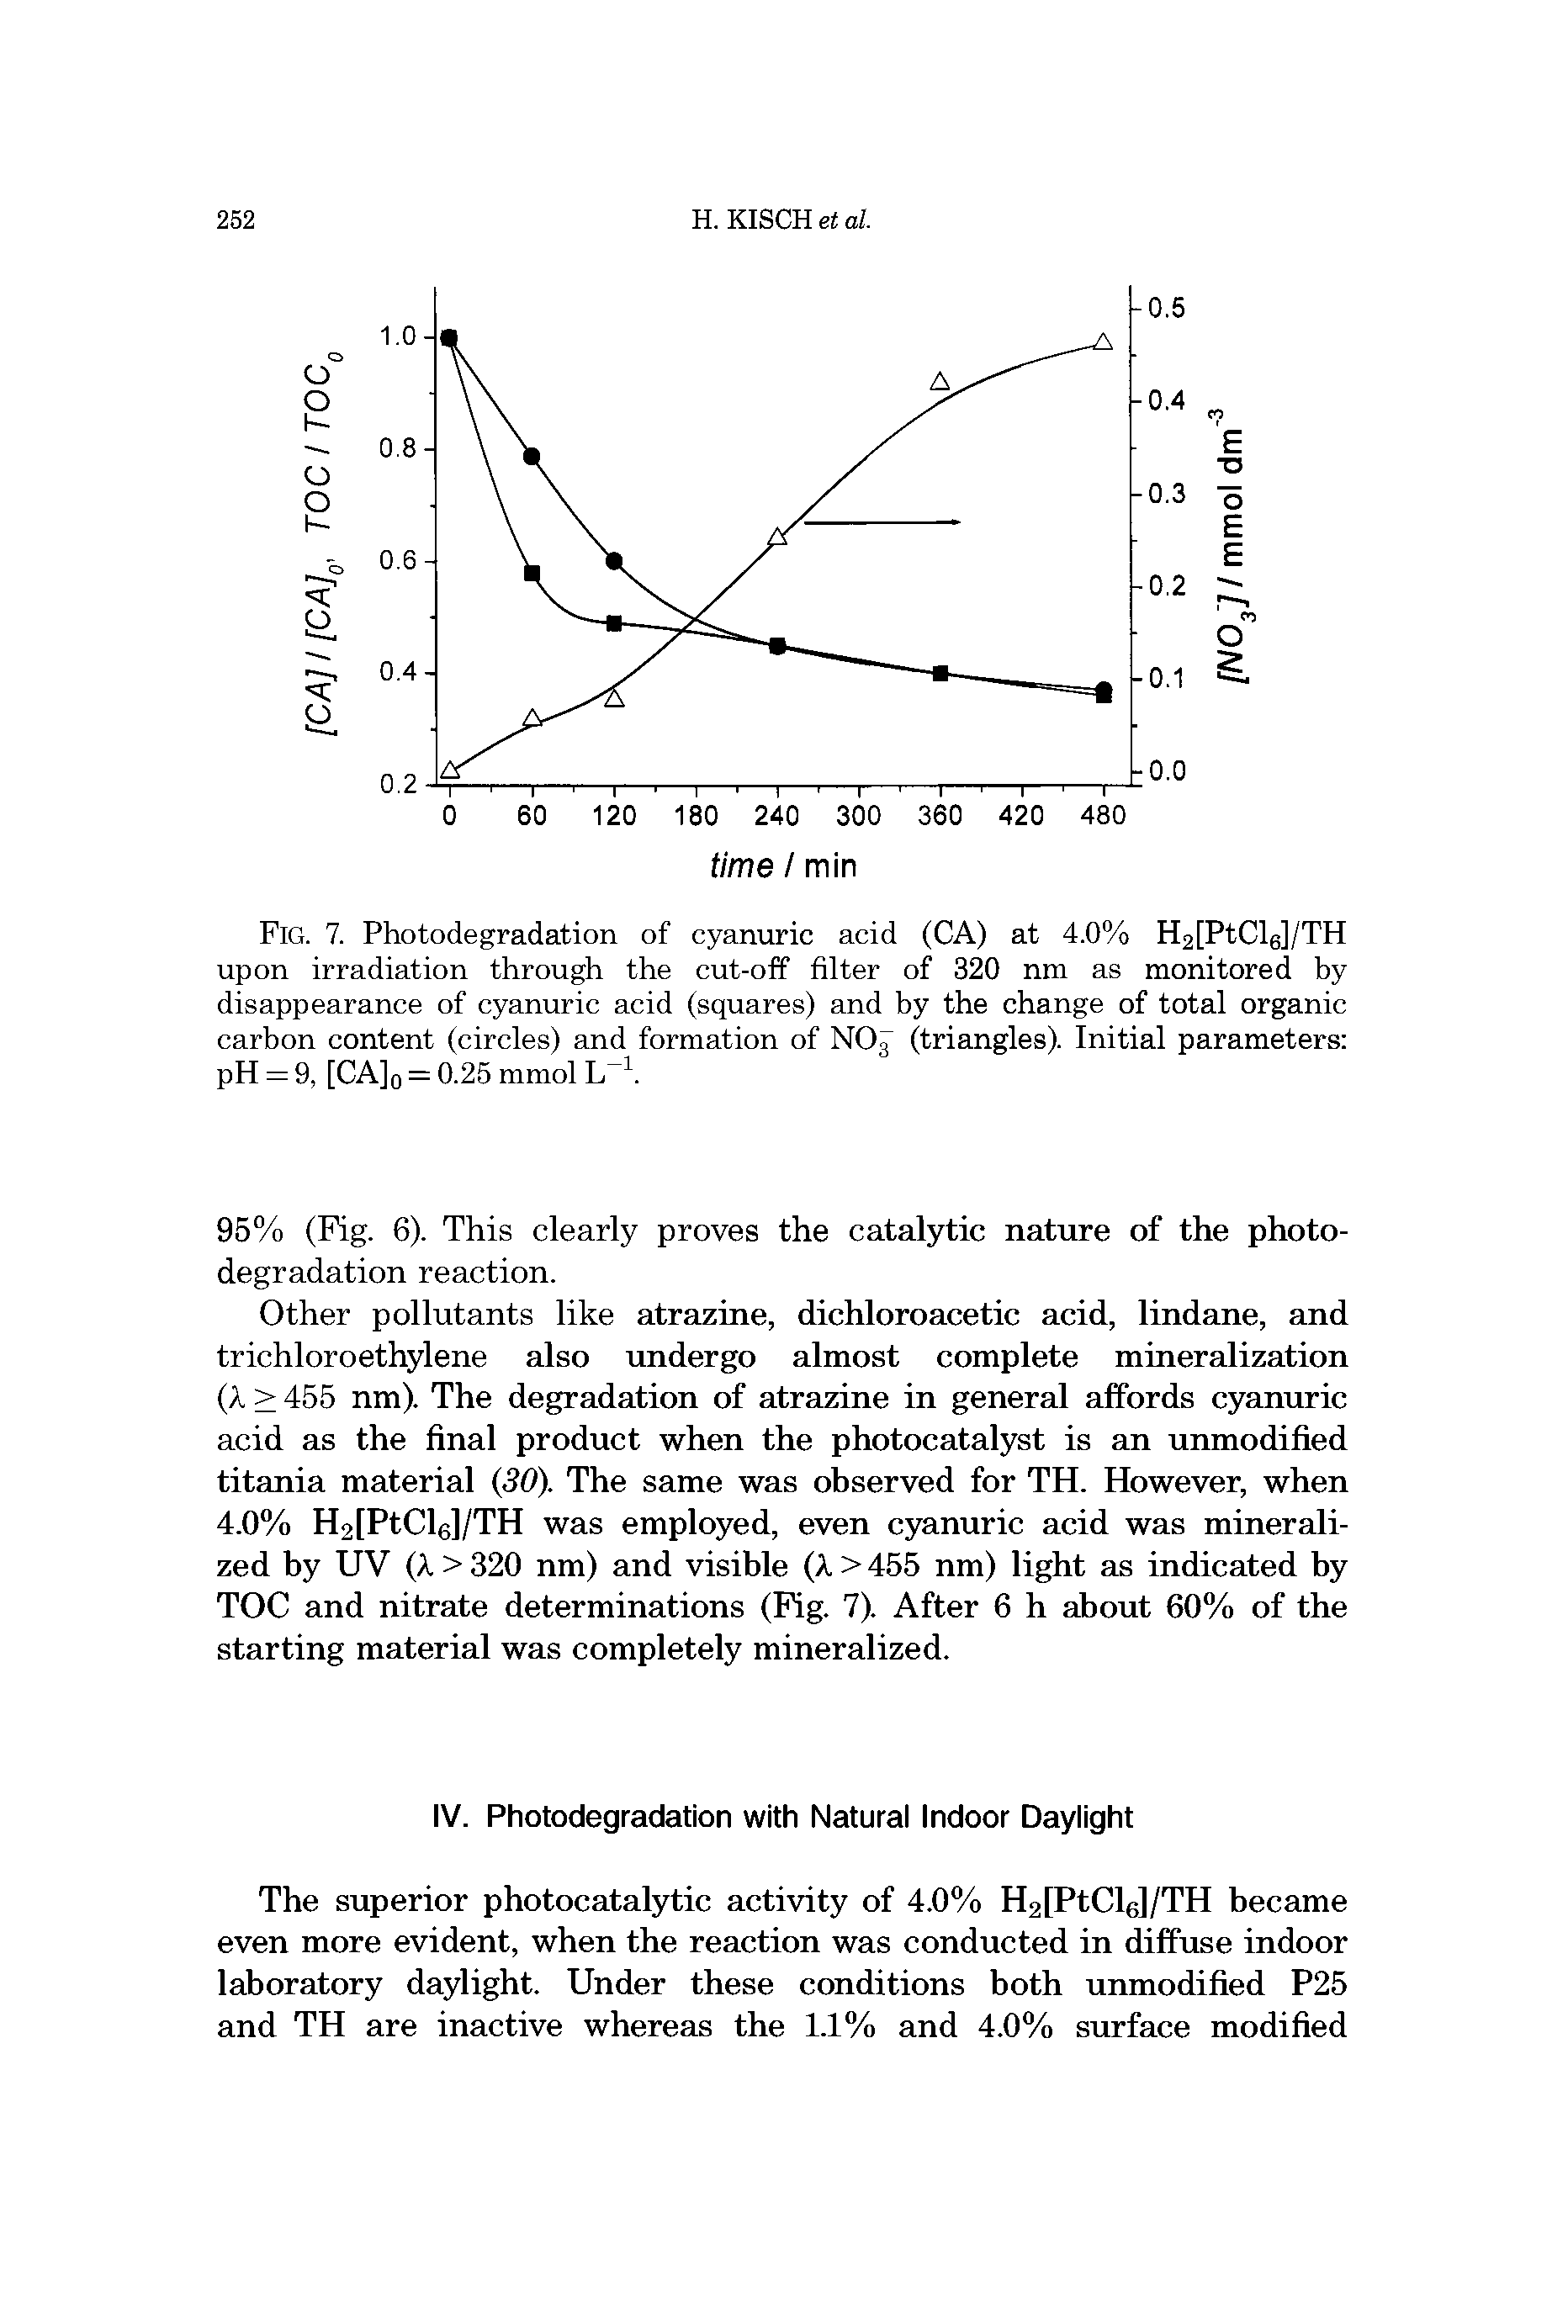 Fig. 7. Photodegradation of cyanuric acid (CA) at 4.0% H2[PtCl6]/TH upon irradiation through the cut-off filter of 320 nm as monitored by disappearance of cyanuric acid (squares) and by the change of total organic carbon content (circles) and formation of NO<( (triangles). Initial parameters pH = 9, [CA]0 = 0.25 mmol L 1.